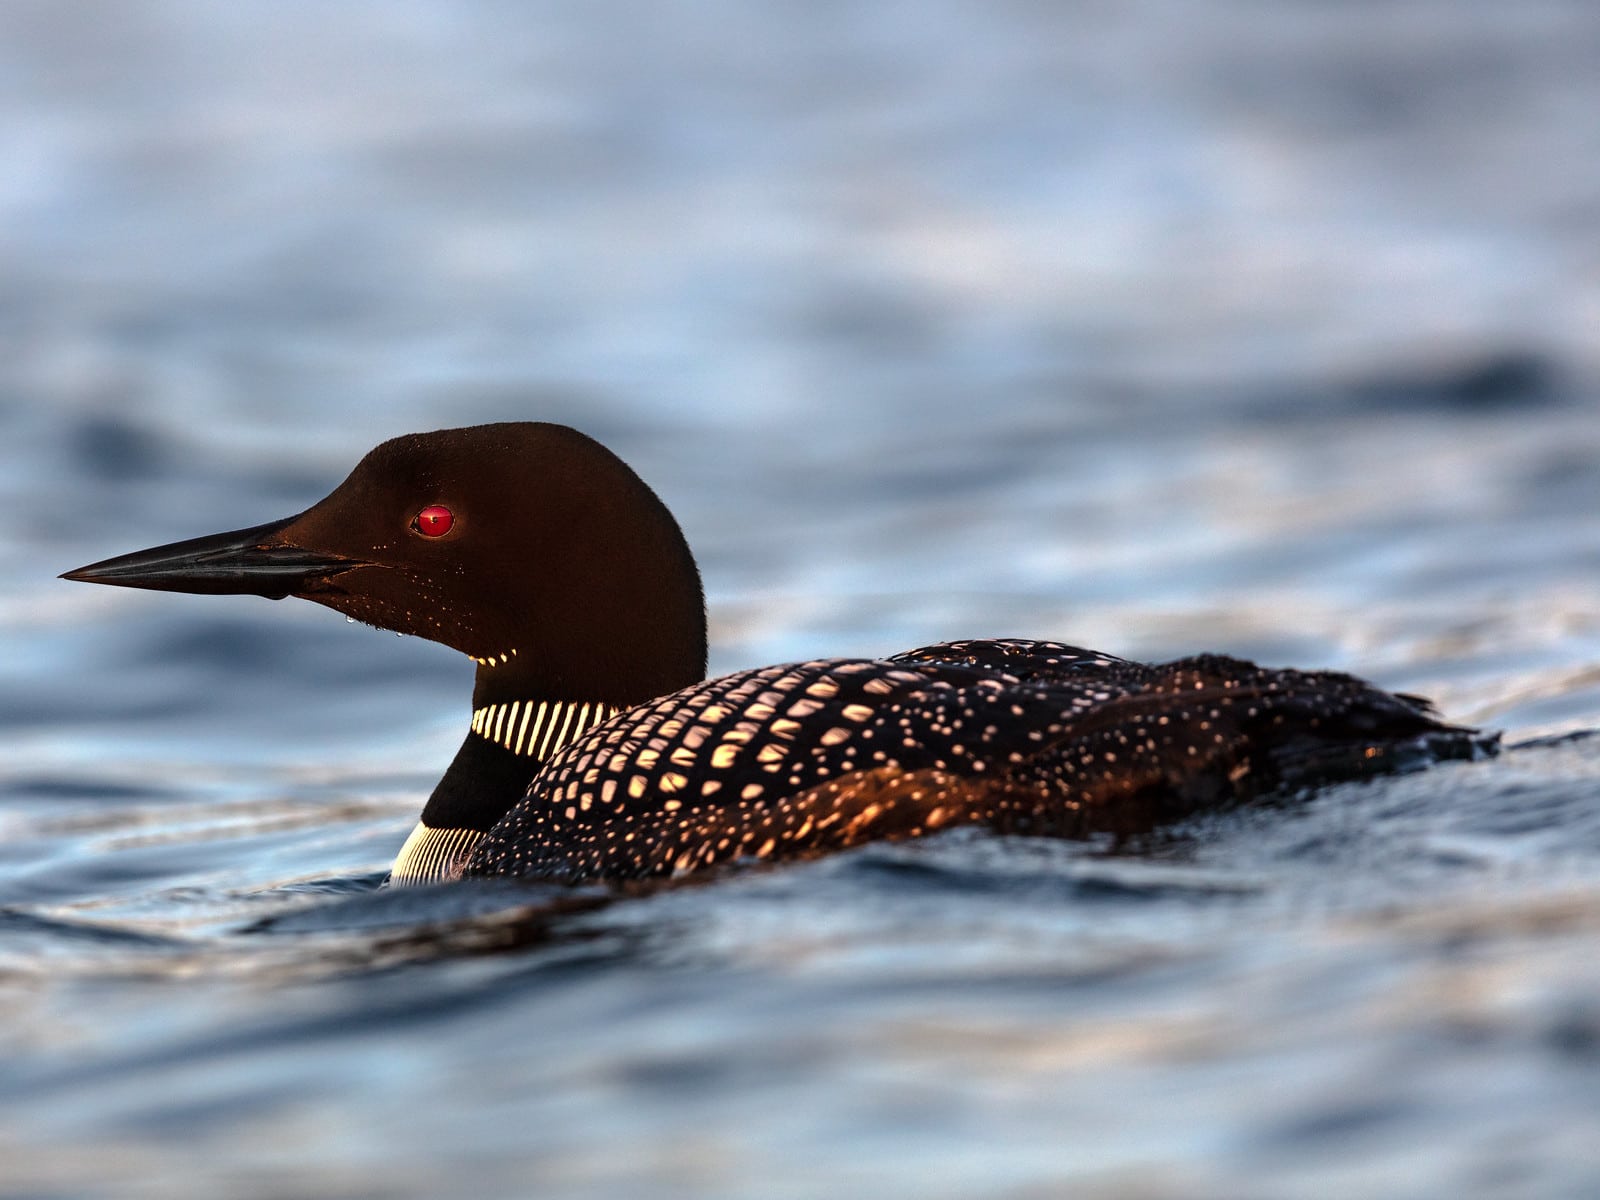 Oil spill penalties will help protect Minnesota loons by promoting